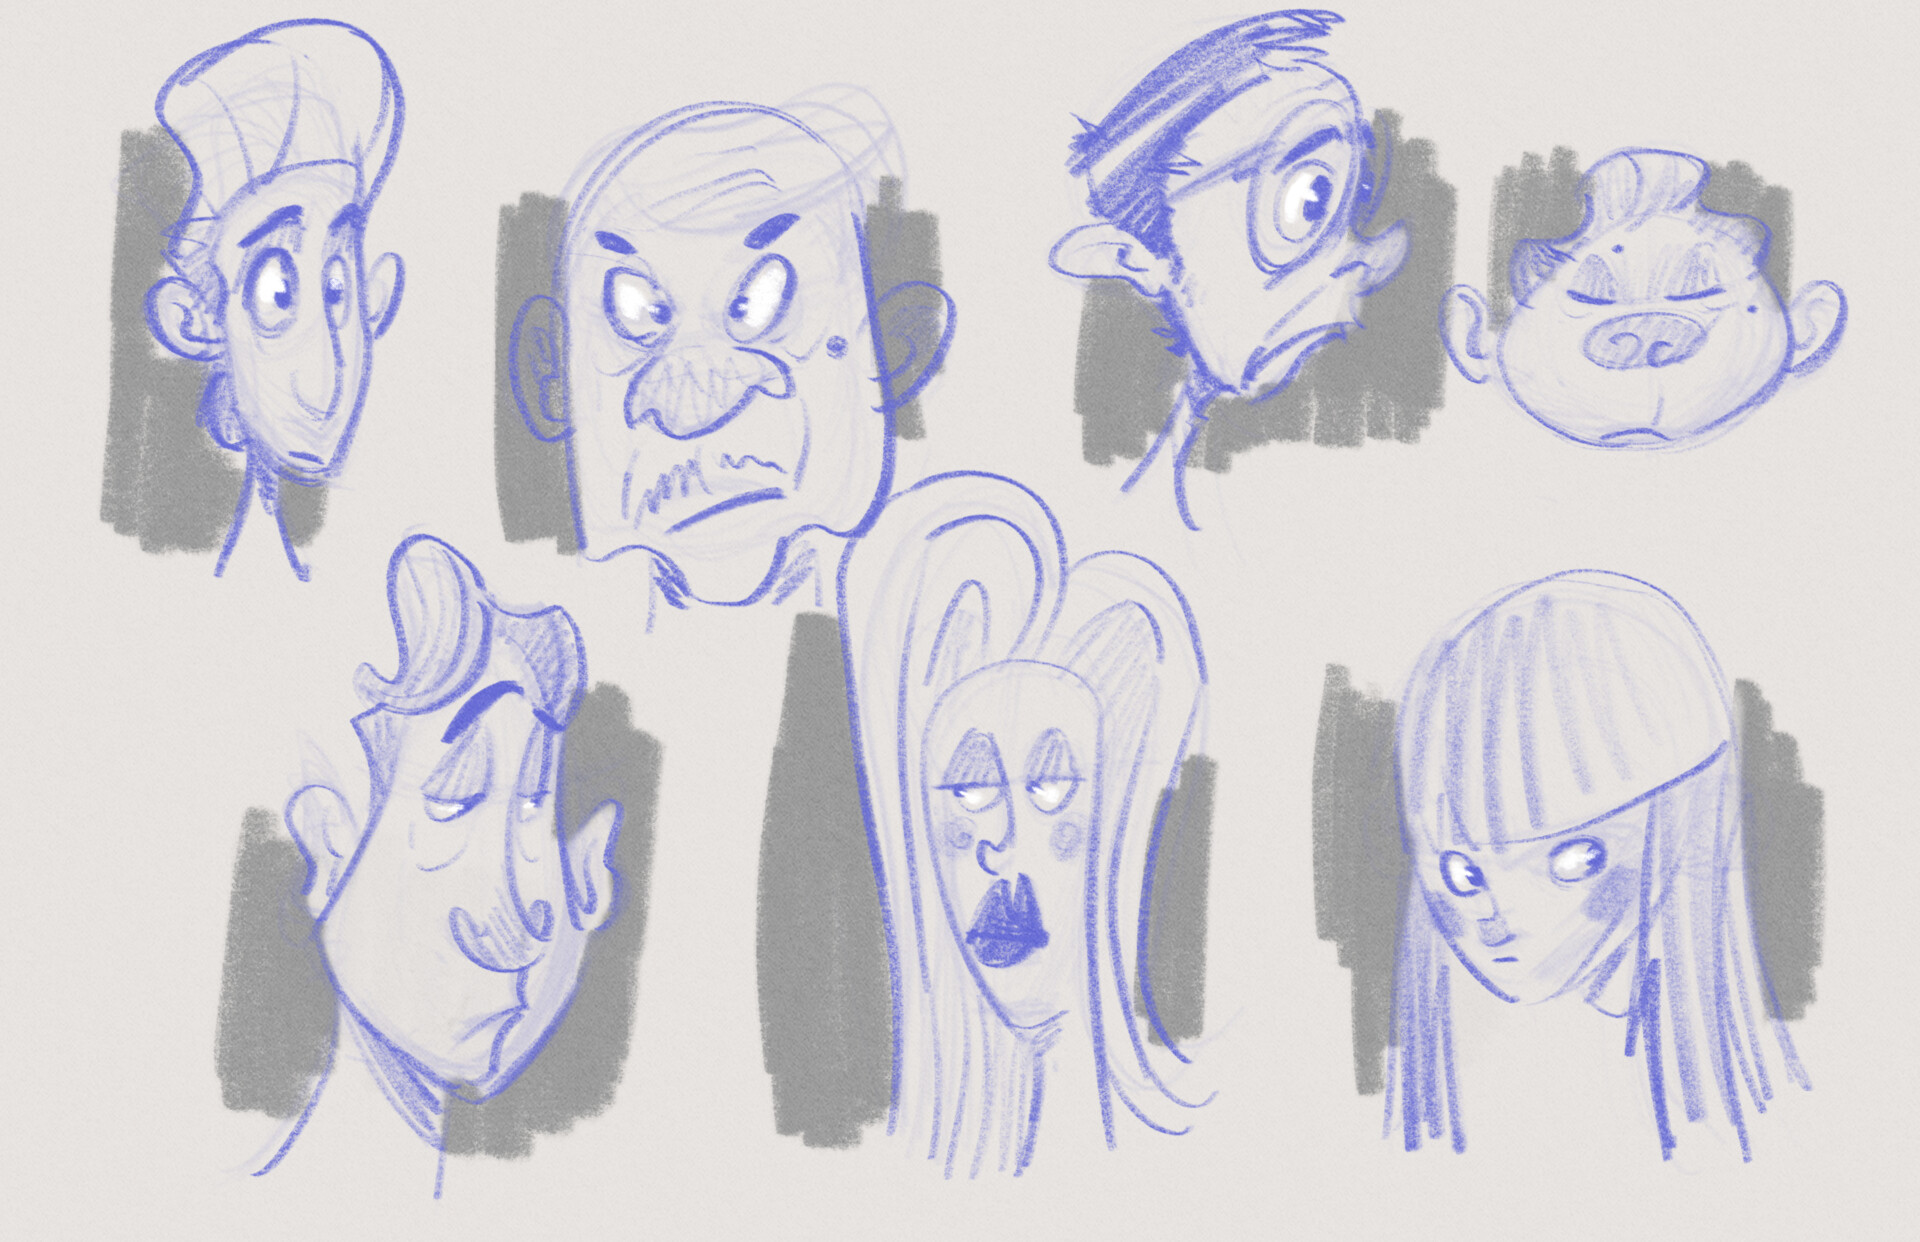 old cartoon characters sketches